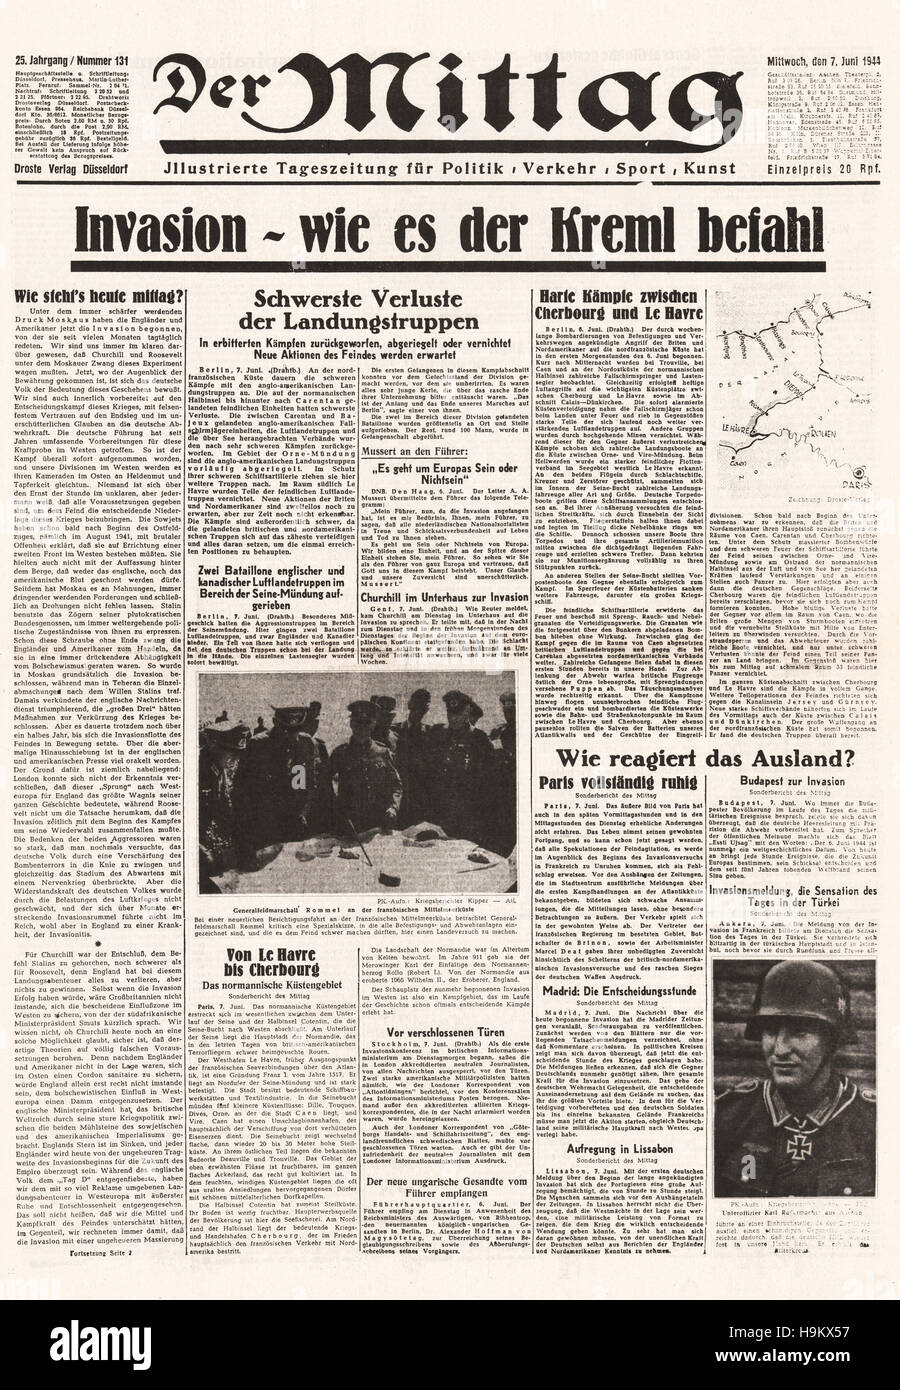 1944 Der Mittag (Germany) front page reporting the D-Day landings in Normandy, France Stock Photo